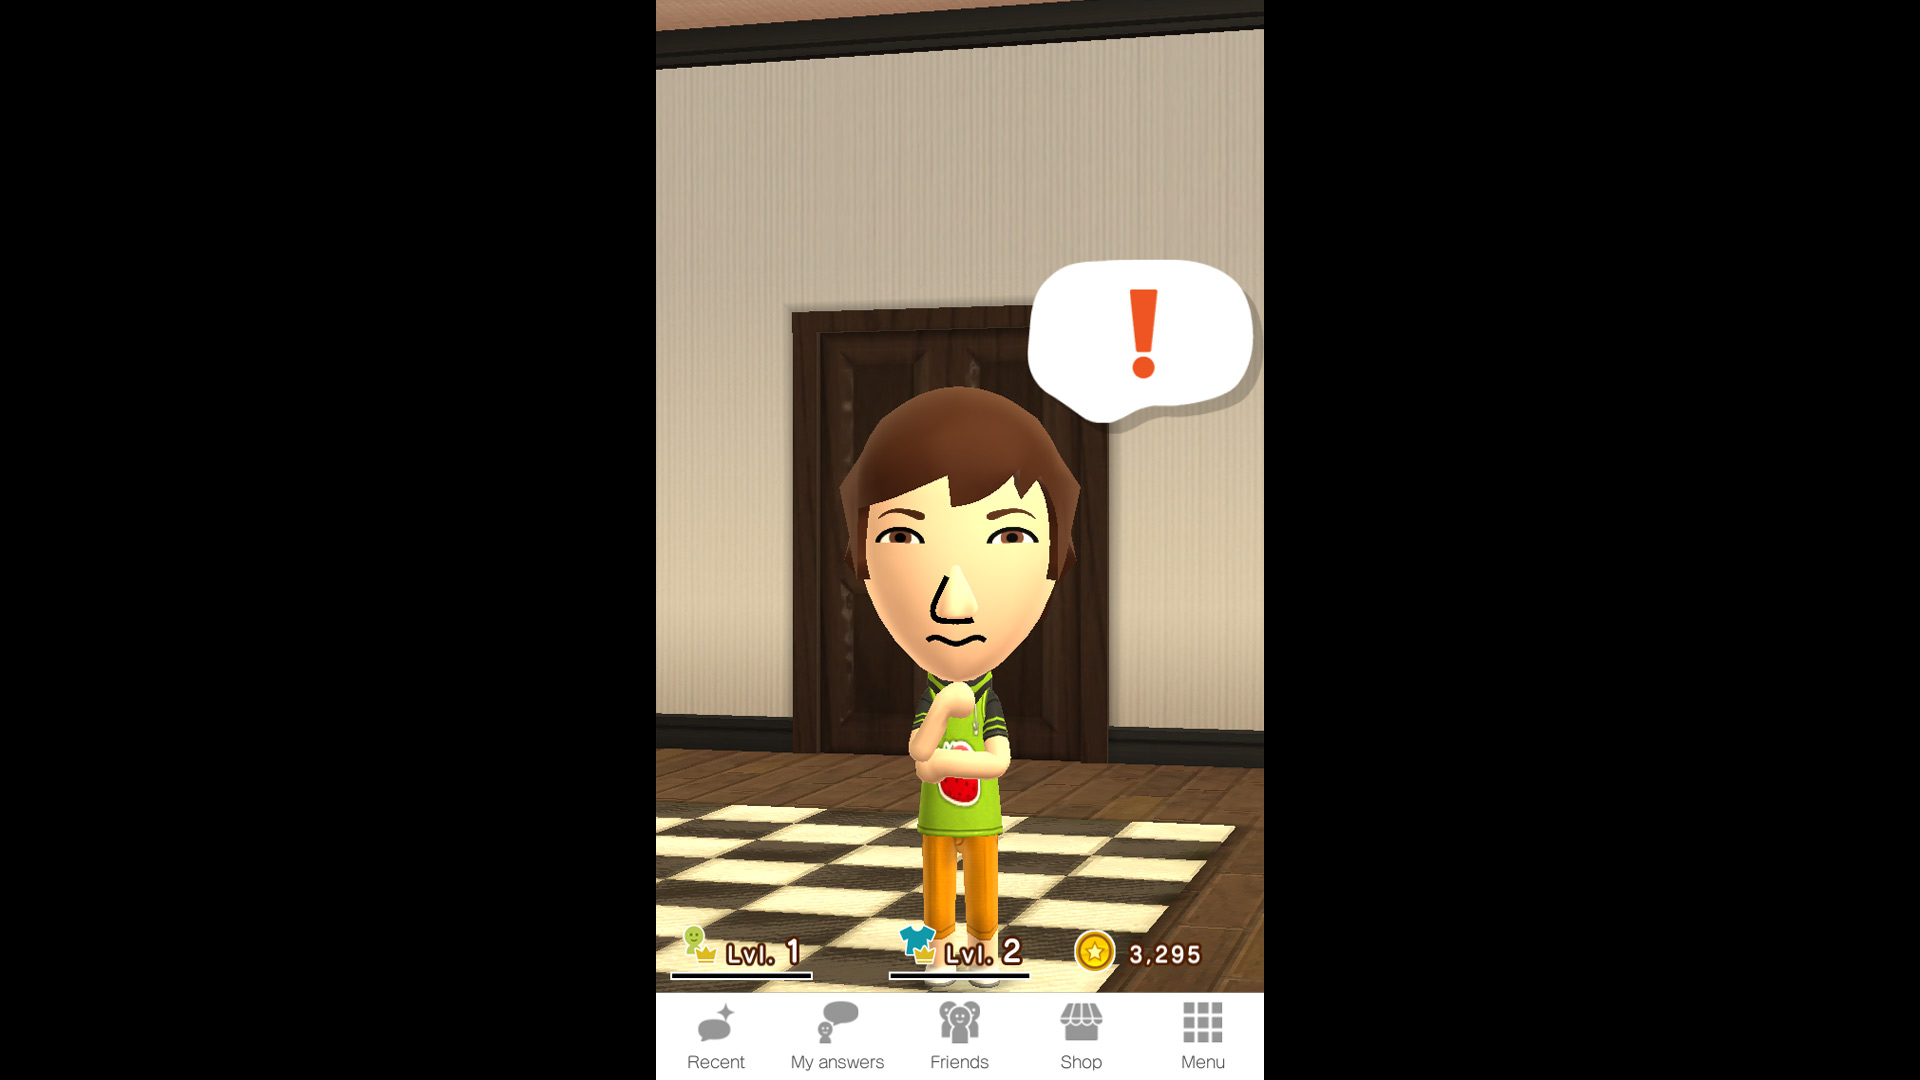 Miitomo is Not Really That Great